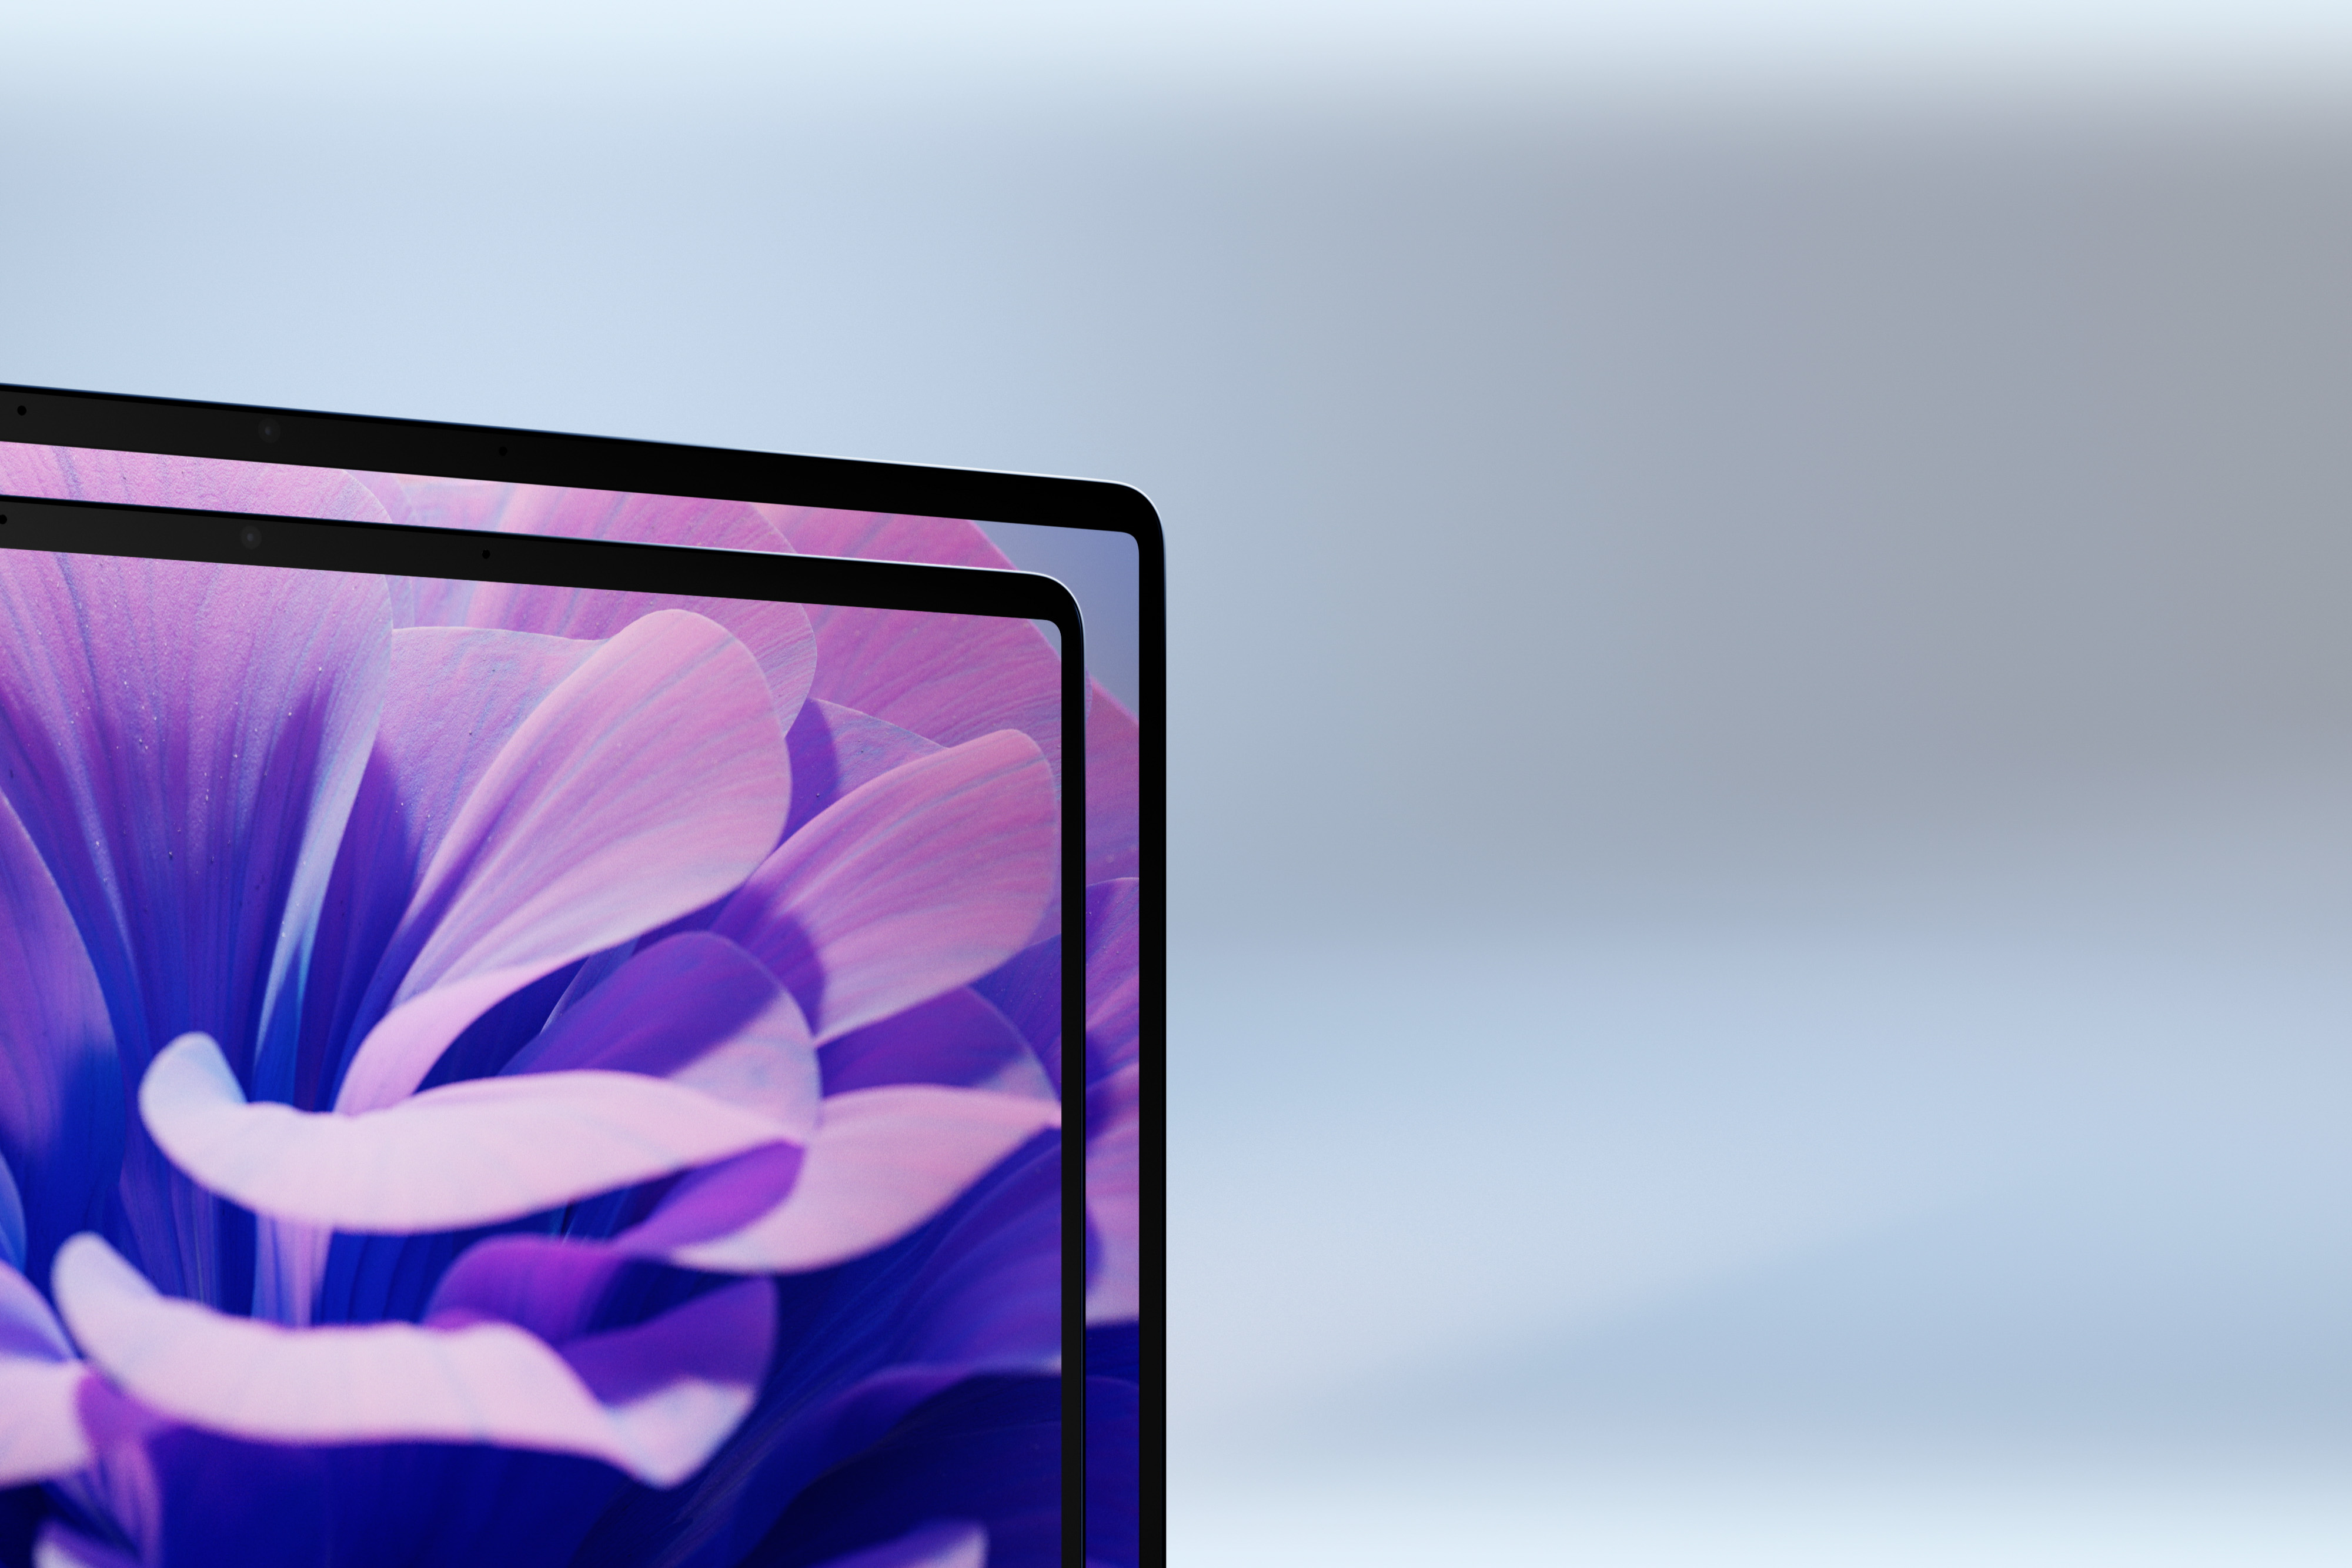 Poster image of Surface Laptop feature video showcasing two display sizes, thin bezels and screen.